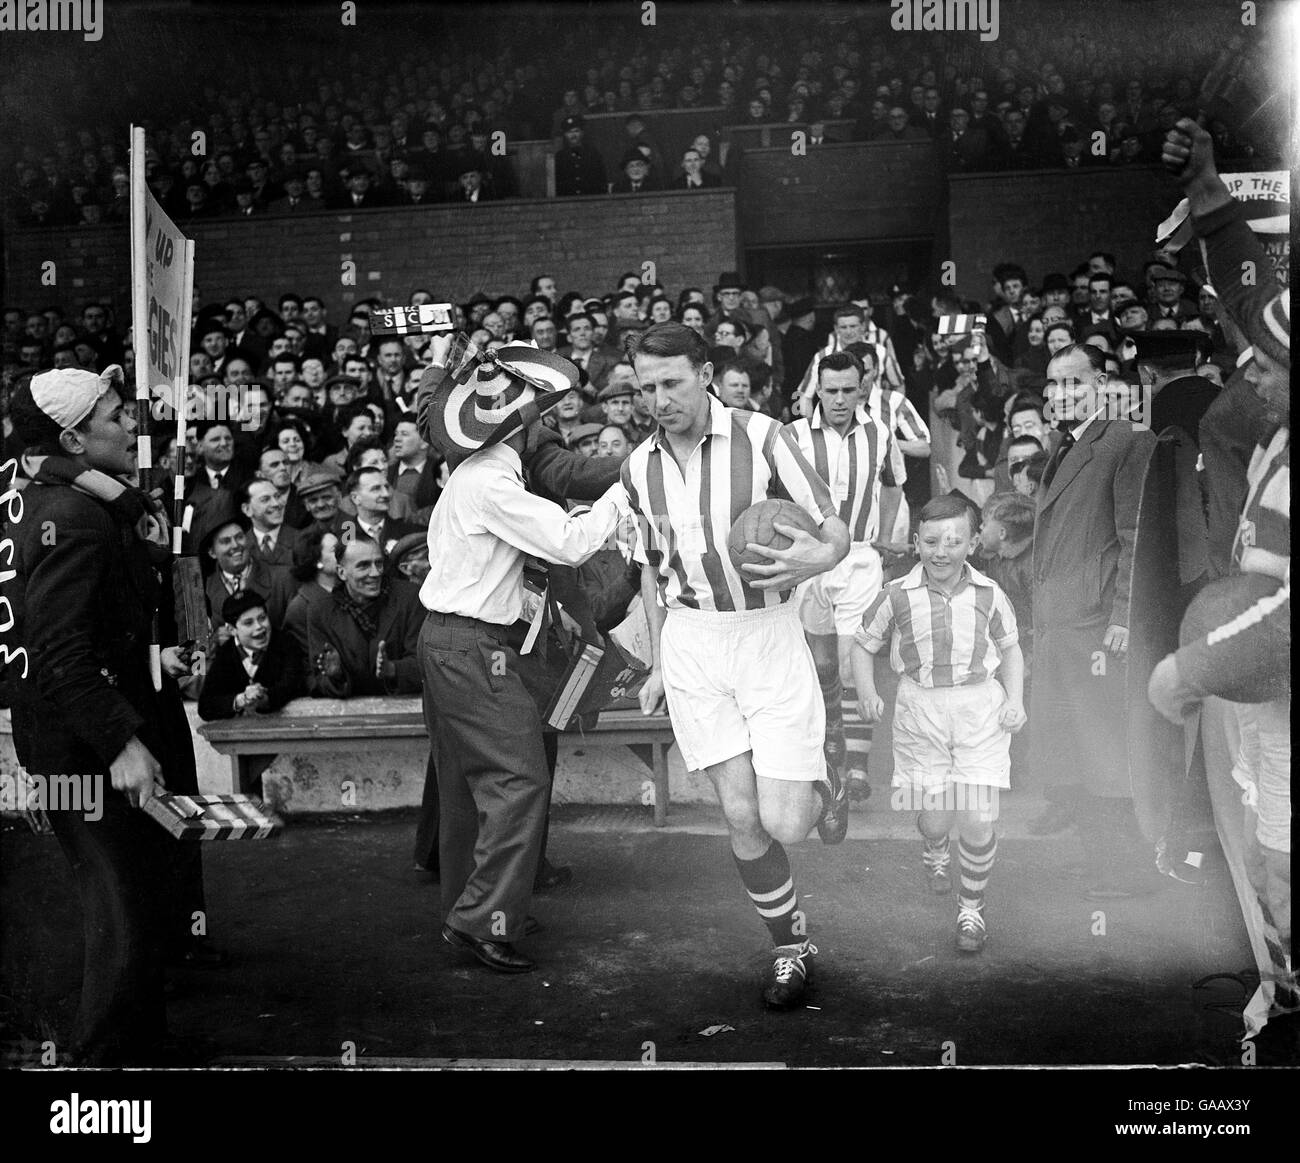 West Bromwich Albion's Ray Barlow (c) leads his team out, cheered on by Pancho Johnny (l) Stock Photo